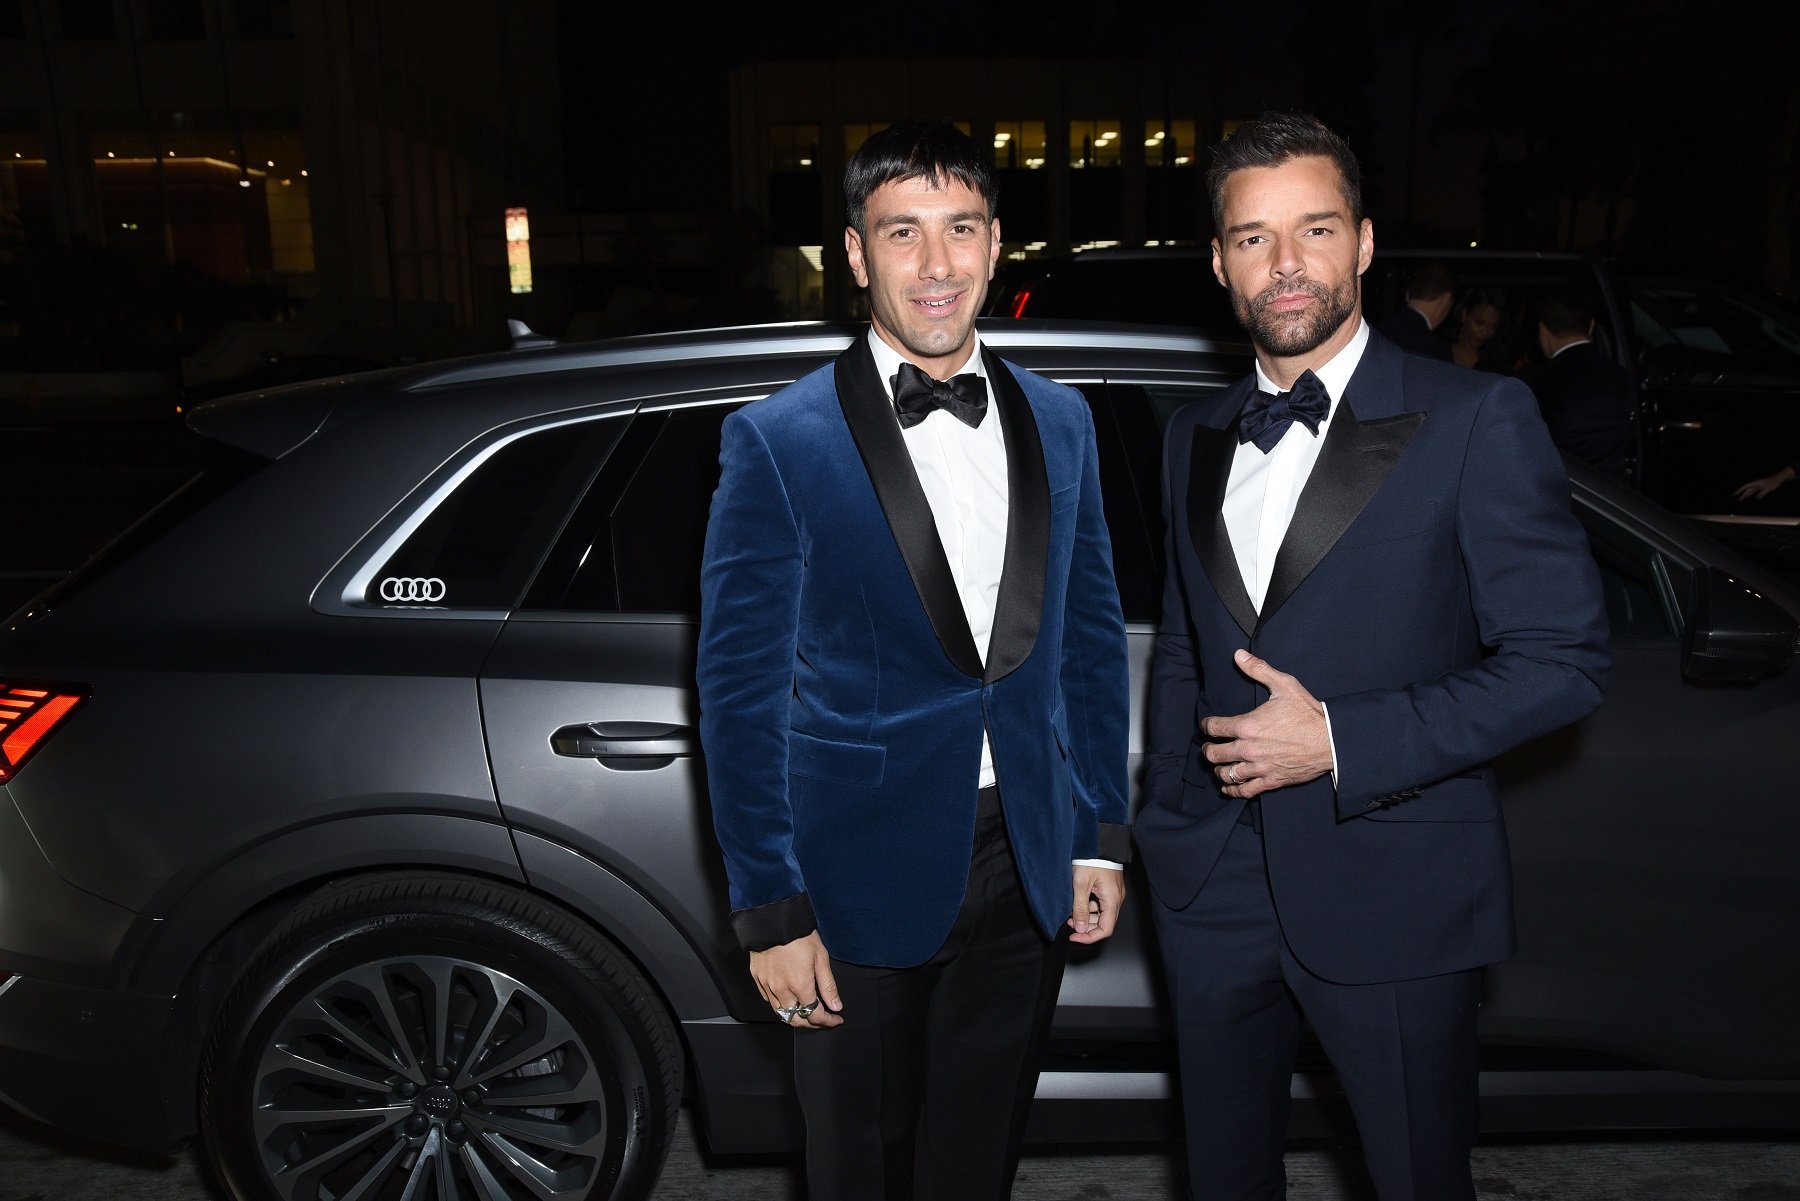 Jwan Yosef and Ricky Martin at the LACMA Art + Film Gala Presented By Gucci on November 02, 2019, in Los Angeles, California | Photo: Presley Ann/Getty Images